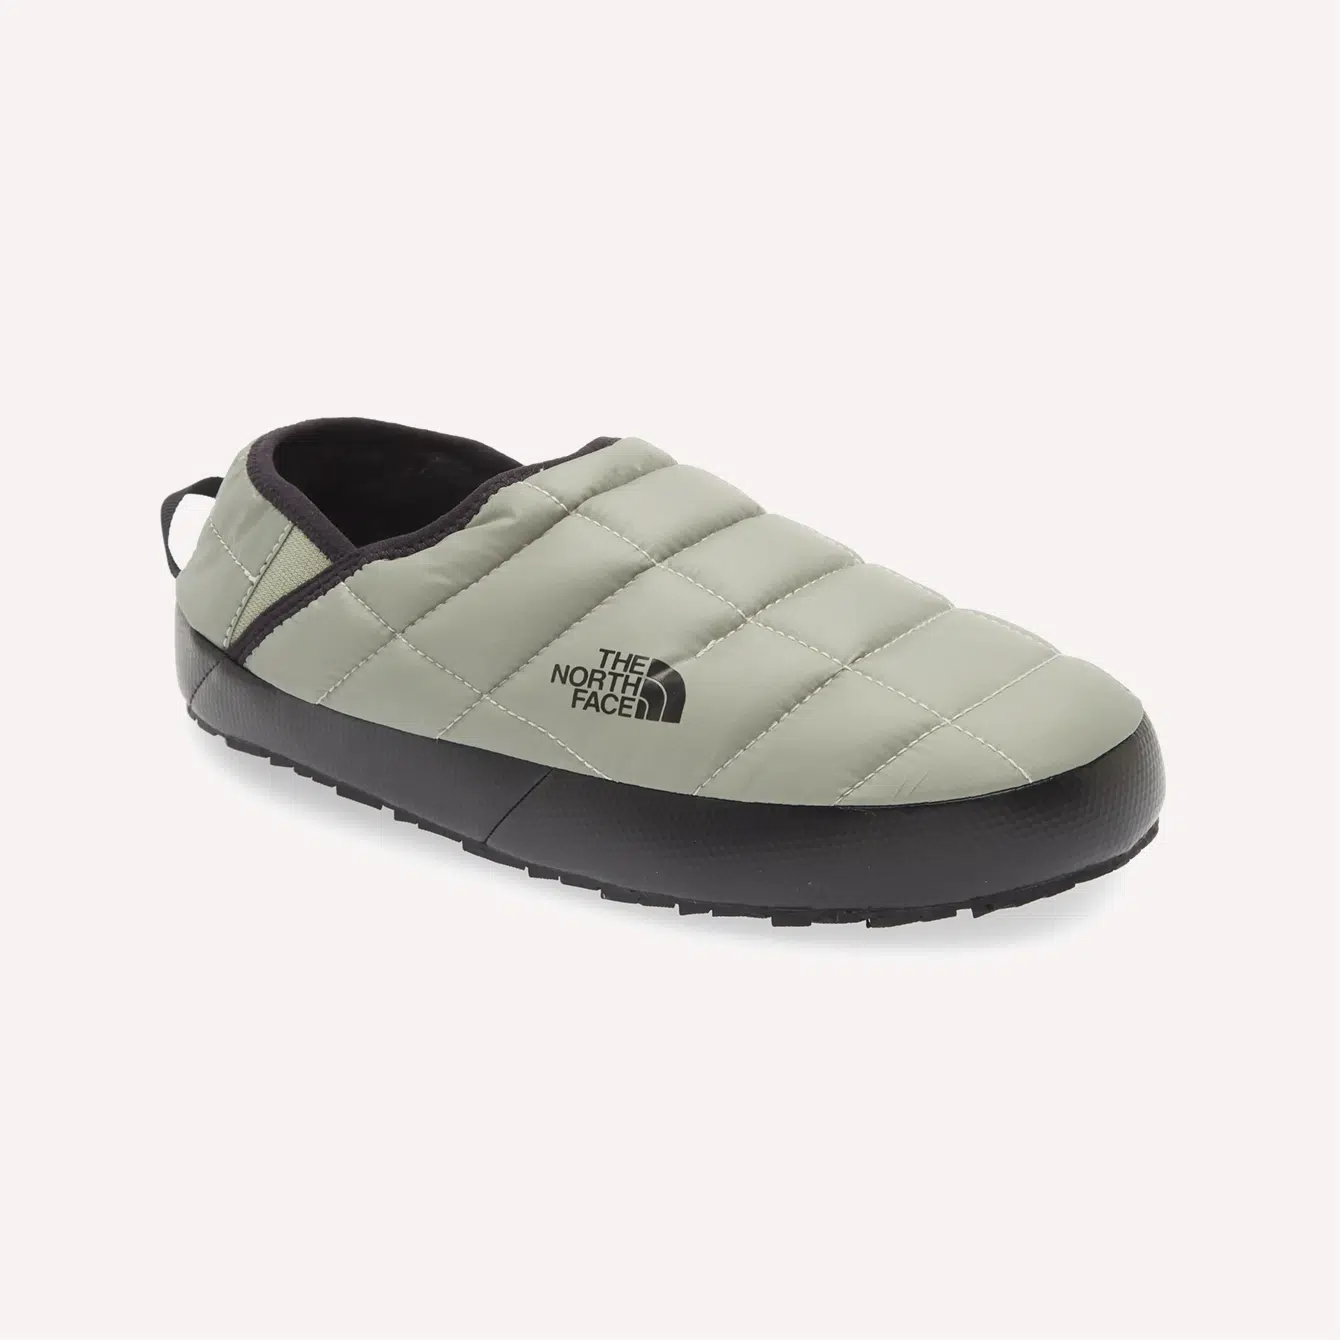 The North Face ThermoBall Traction Slipper